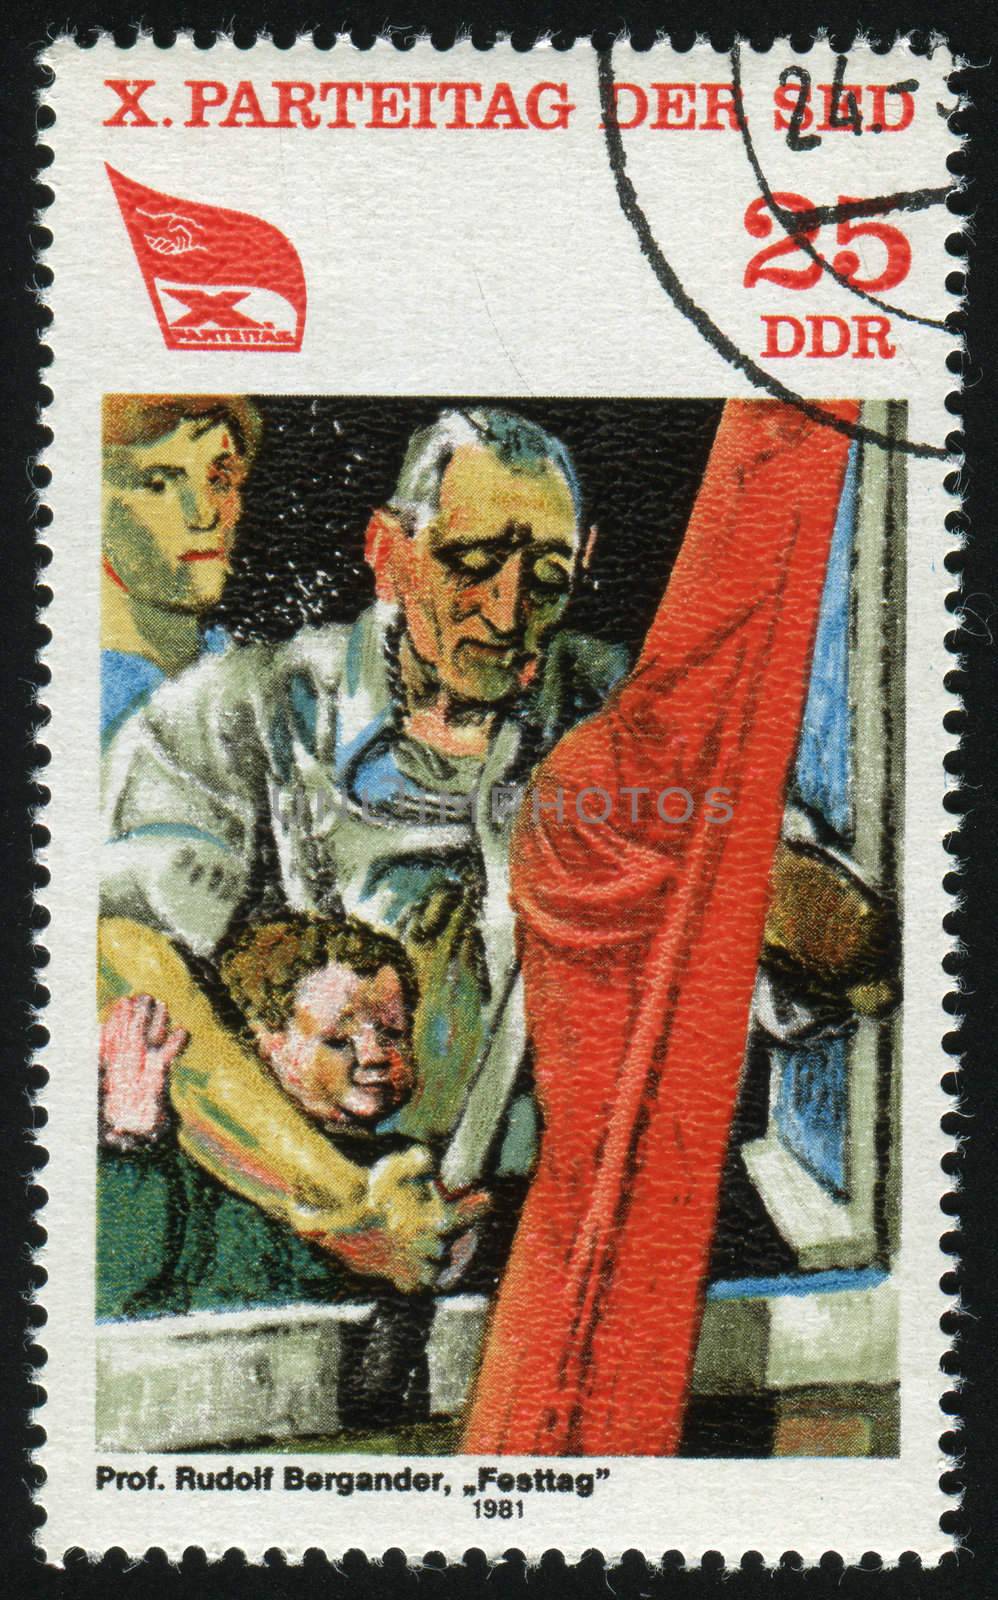 postage stamp by rook